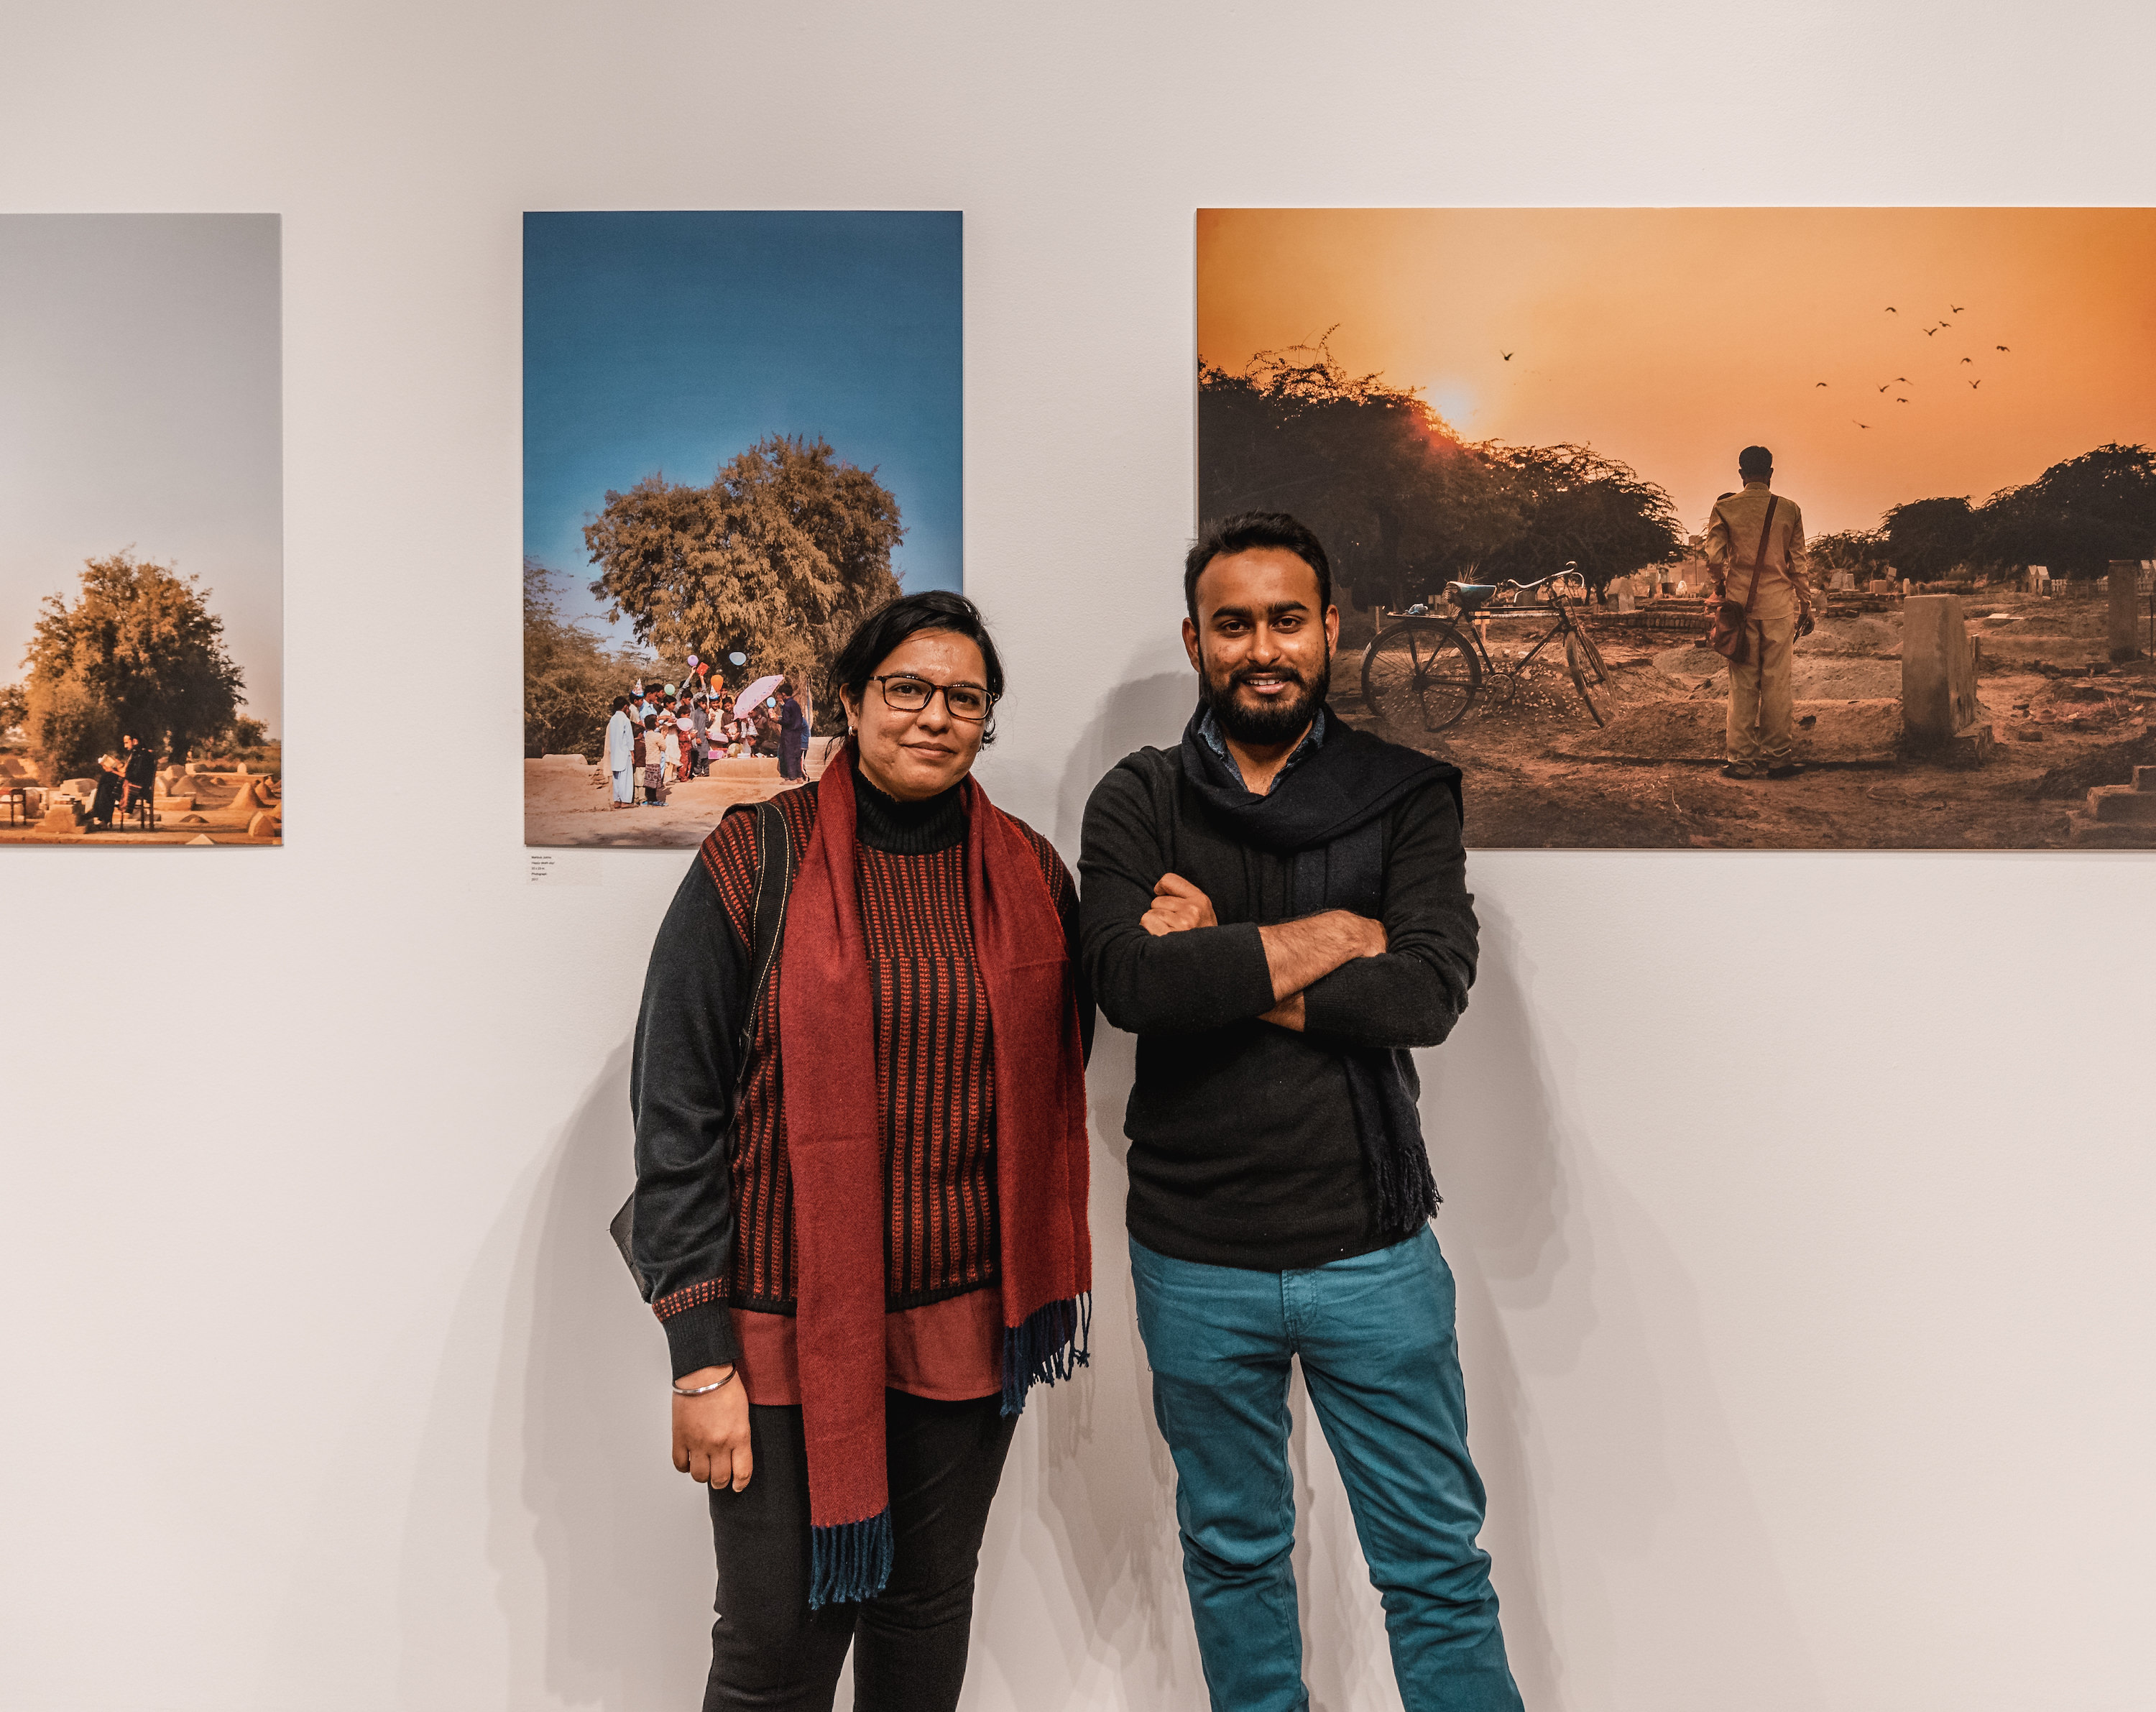 Krupa Makhija, left, and Mahbub Jokhio, right, in front of the exhibit.